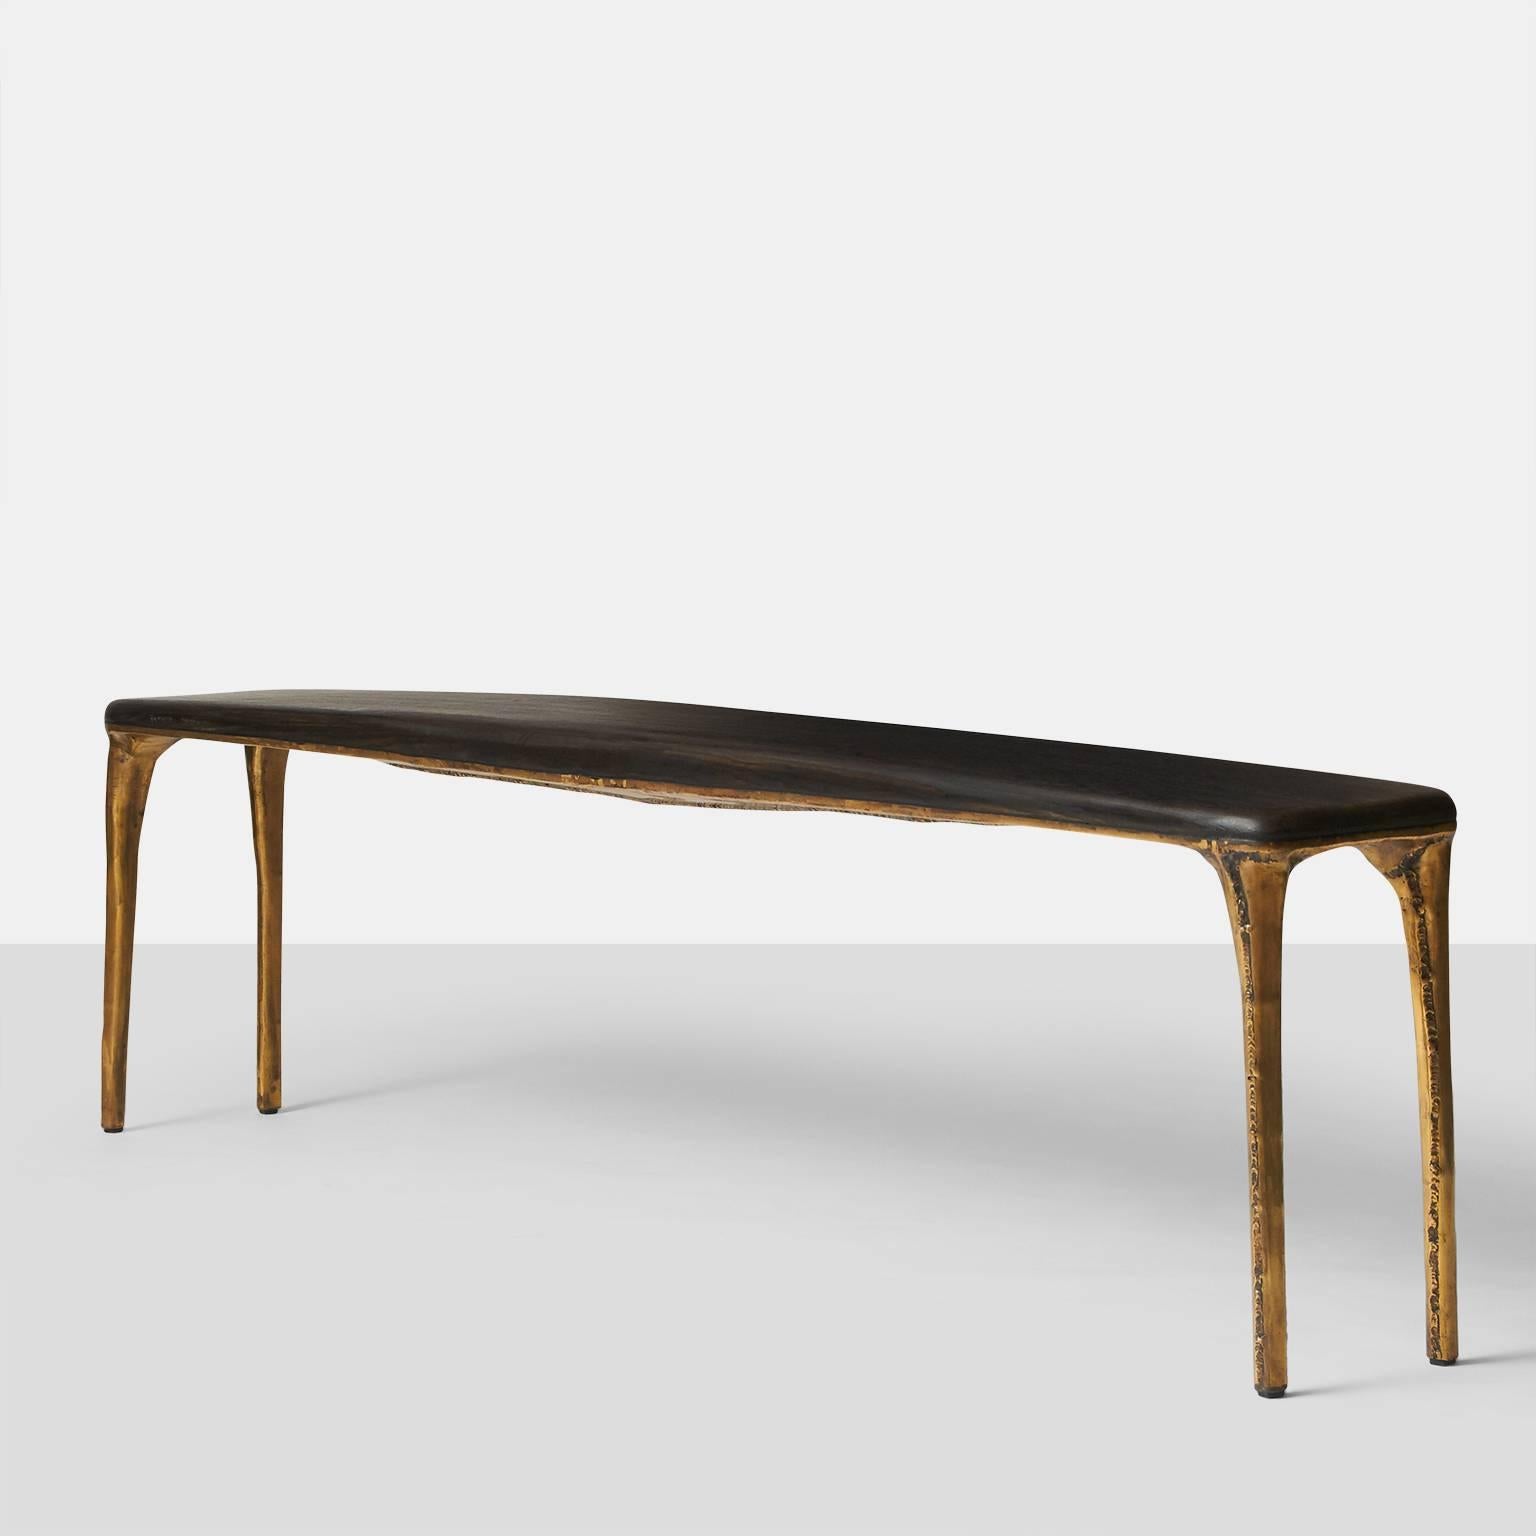 A long bench by German furniture designer Valentin Loellmann, circa 2016. Completely hand constructed in brass and not cast, with a charred oak seat that has been made to fit the shape. The brass construction creates a unique pattern on each piece.